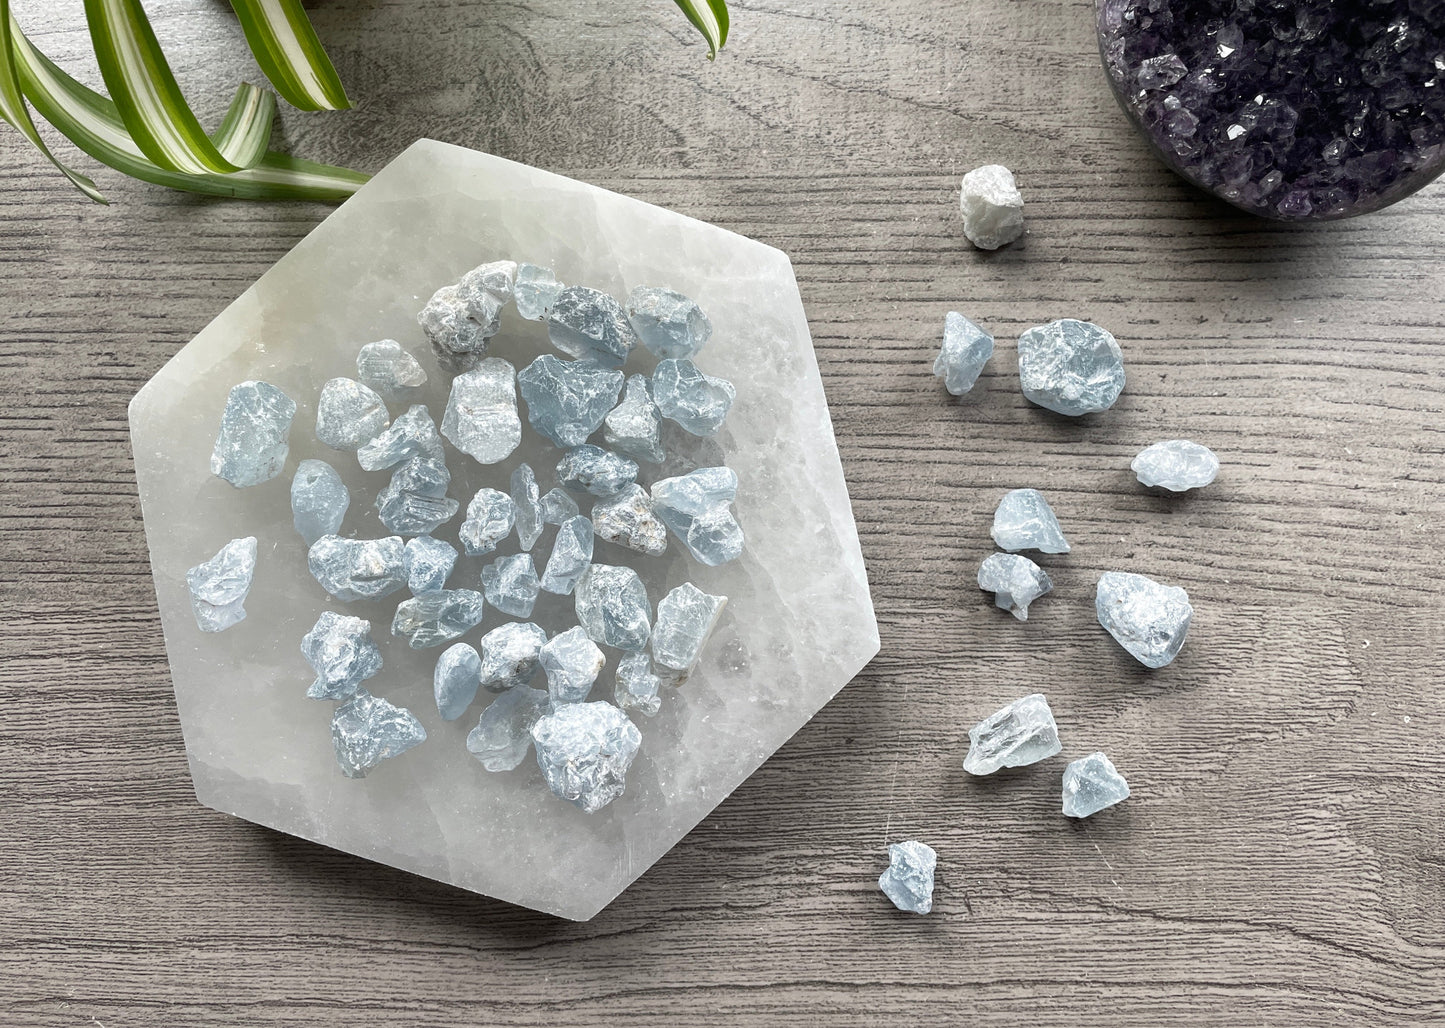 Pictured are various pieces of raw celestite.